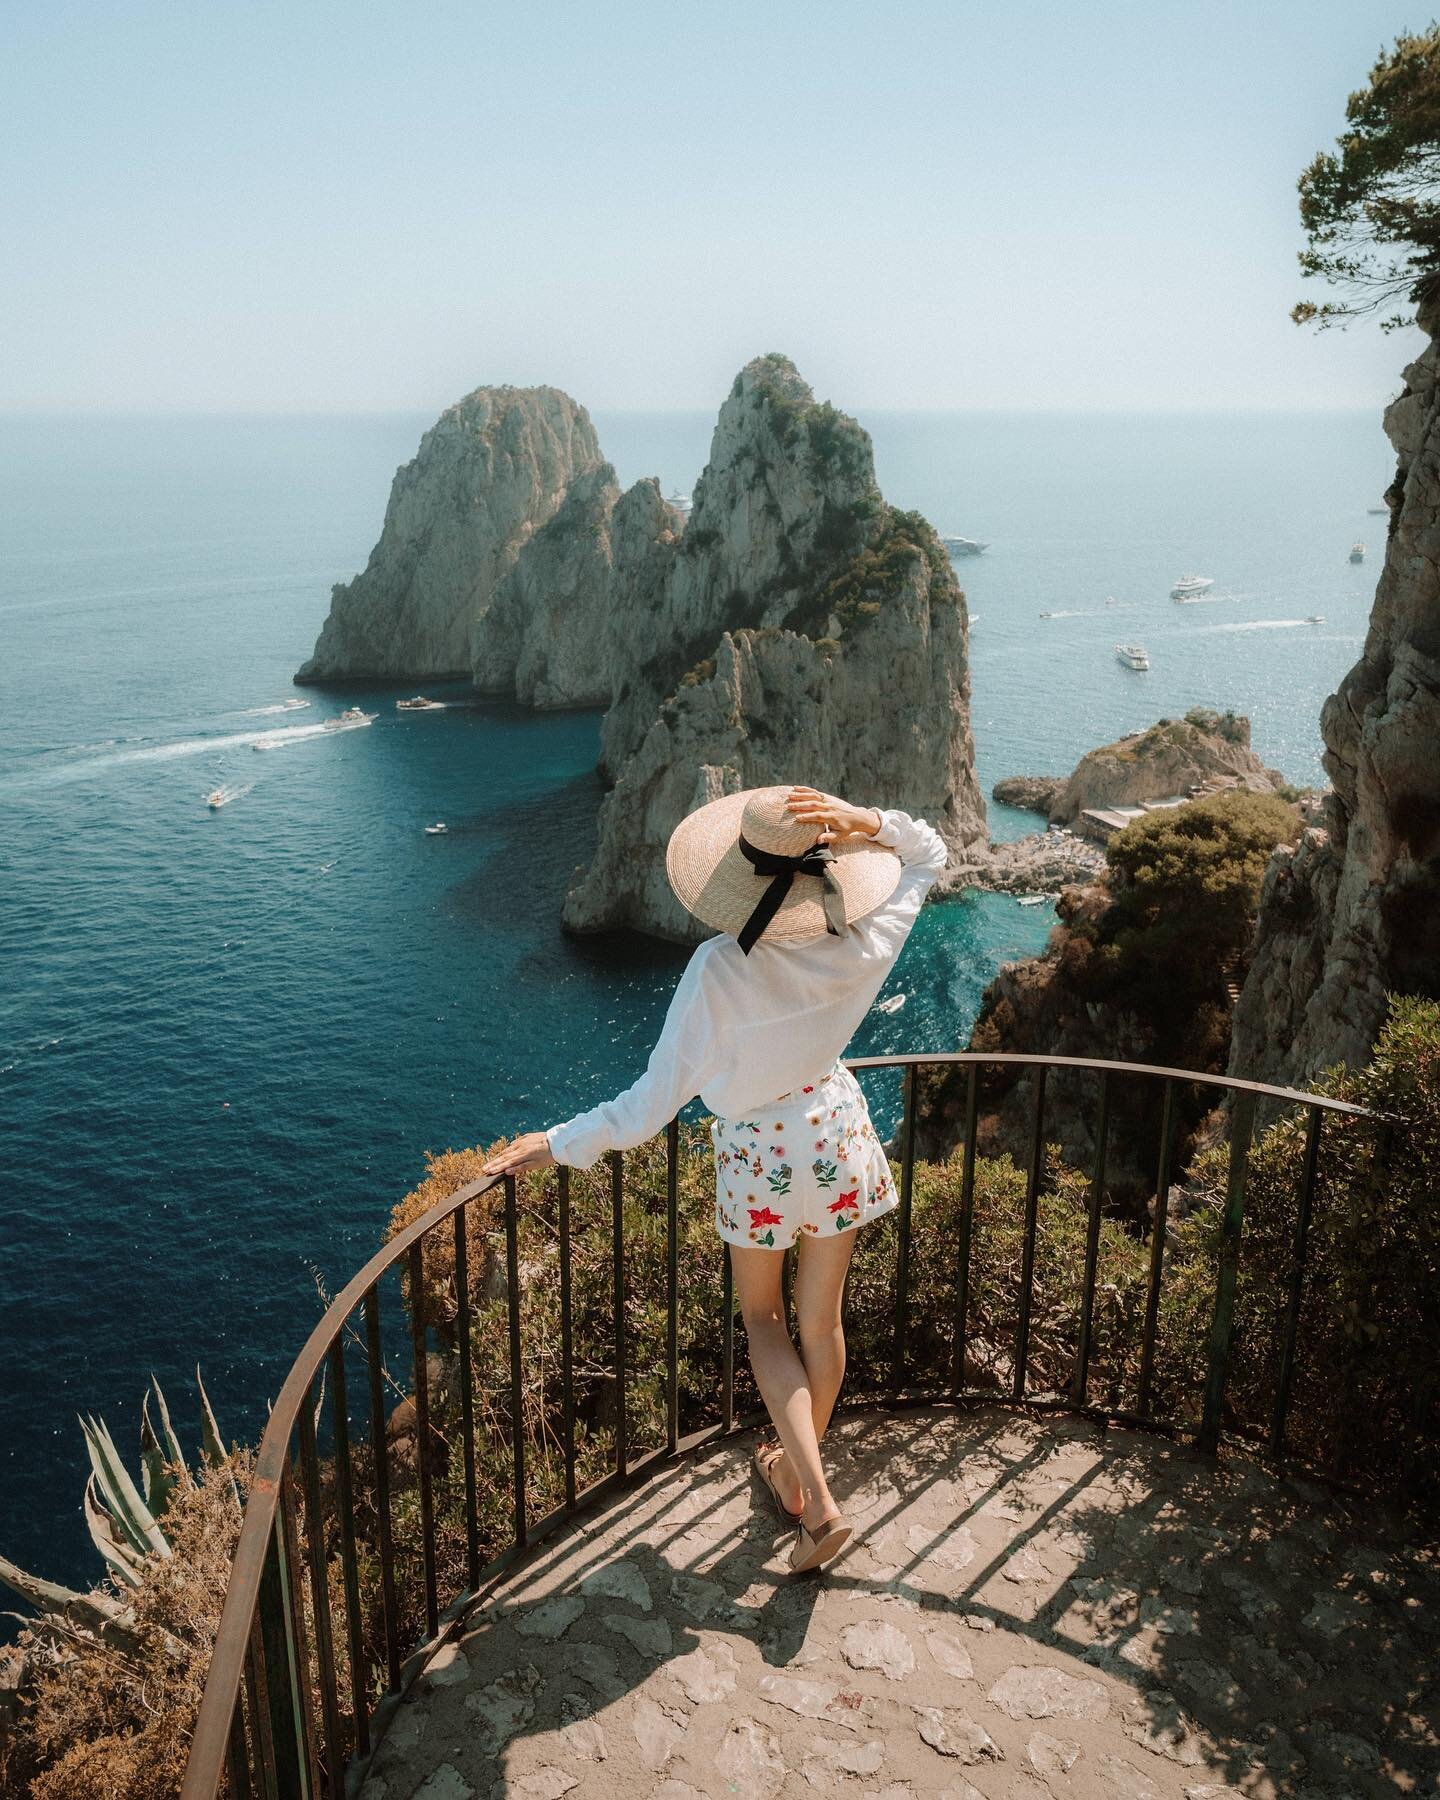 🇬🇧 The best viewpoints in Capri:
1. Punta Cannone
2. Gardens of Augustus
3. Belvedere del Pizzolungo
4. View from Villa San Michele
5. View from Villa Lysis
6. Monte Solaro
7. Belvedere Tragara
More in our highlighted stories from Capri ✨
.
🇵🇱 Na